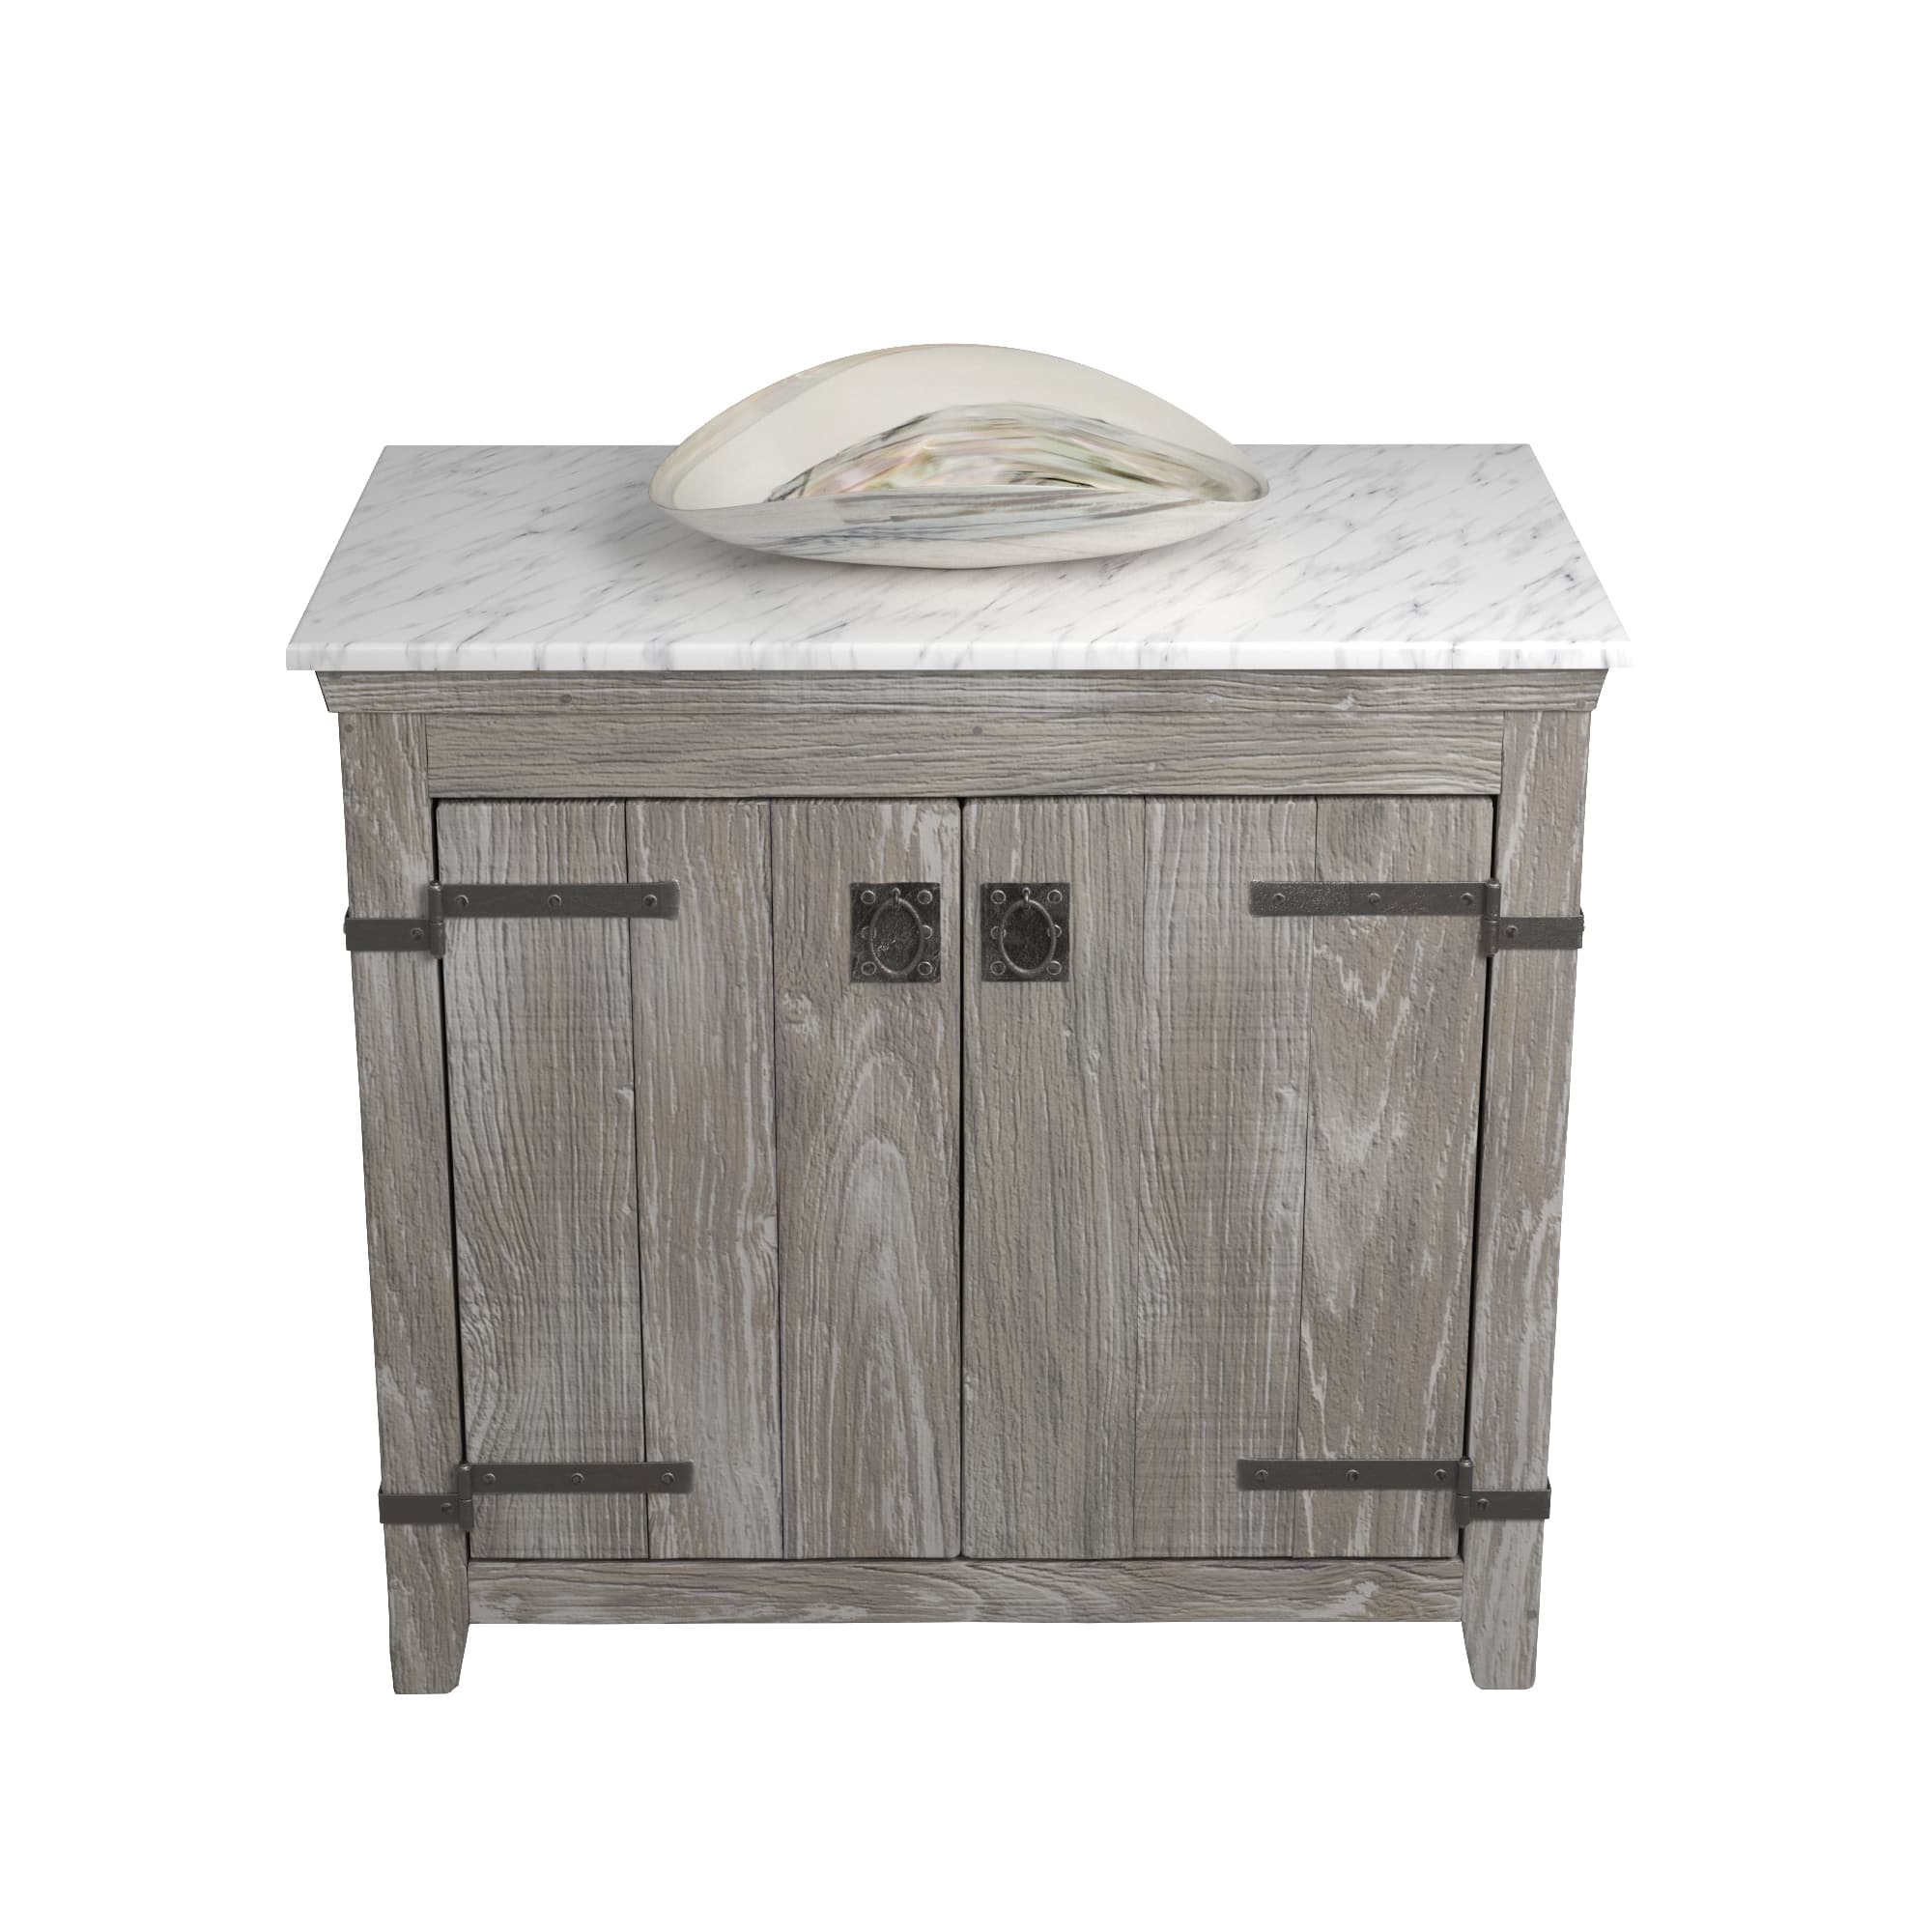 Native Trails 36" Americana Vanity in Driftwood with Carrara Marble Top and Sorrento in Abalone, Single Faucet Hole, BND36-VB-CT-MG-095